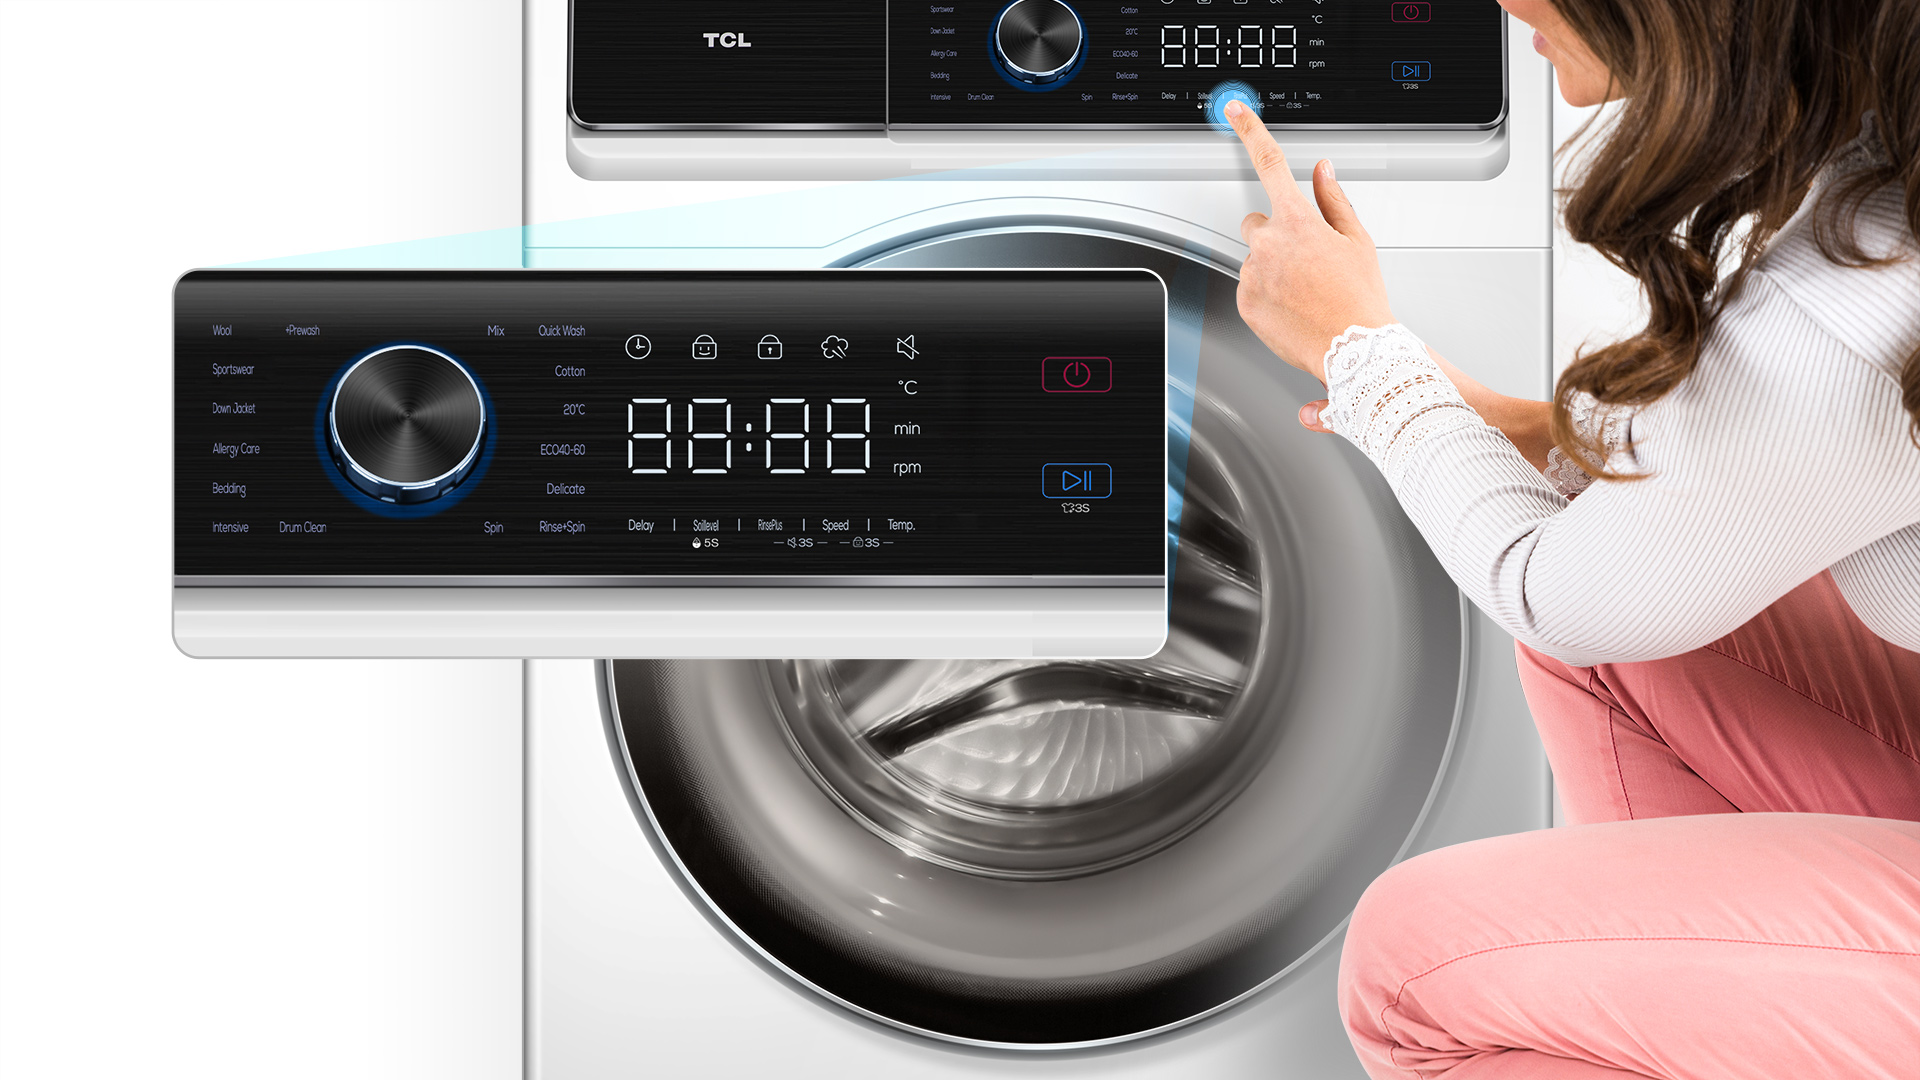 TCL washing-machine LED Touch Control